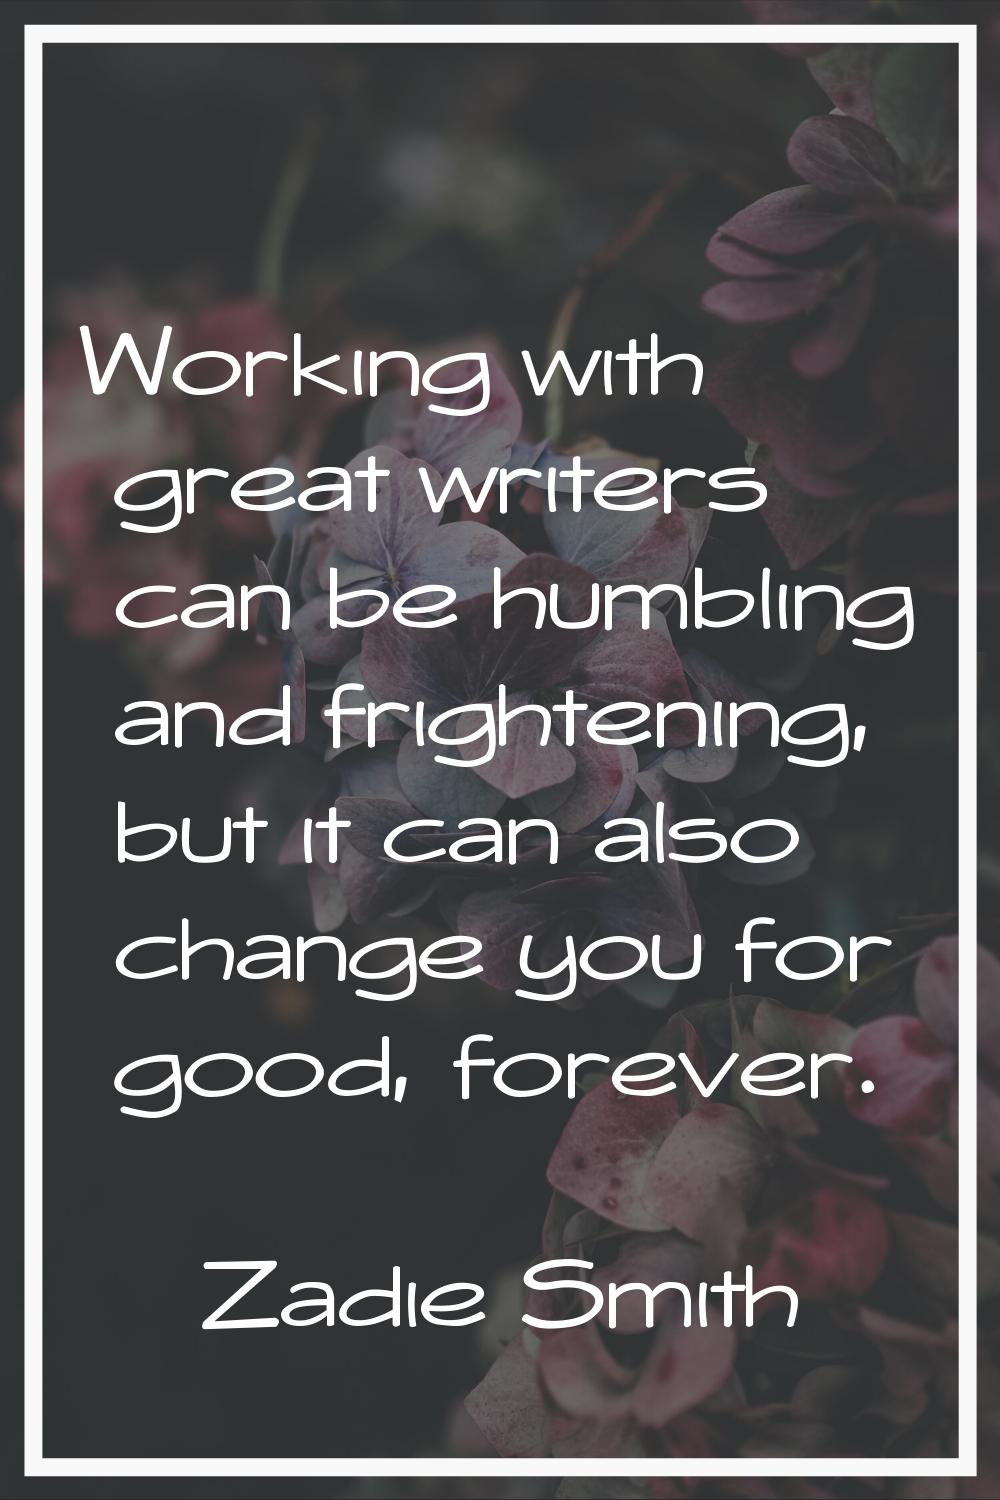 Working with great writers can be humbling and frightening, but it can also change you for good, fo